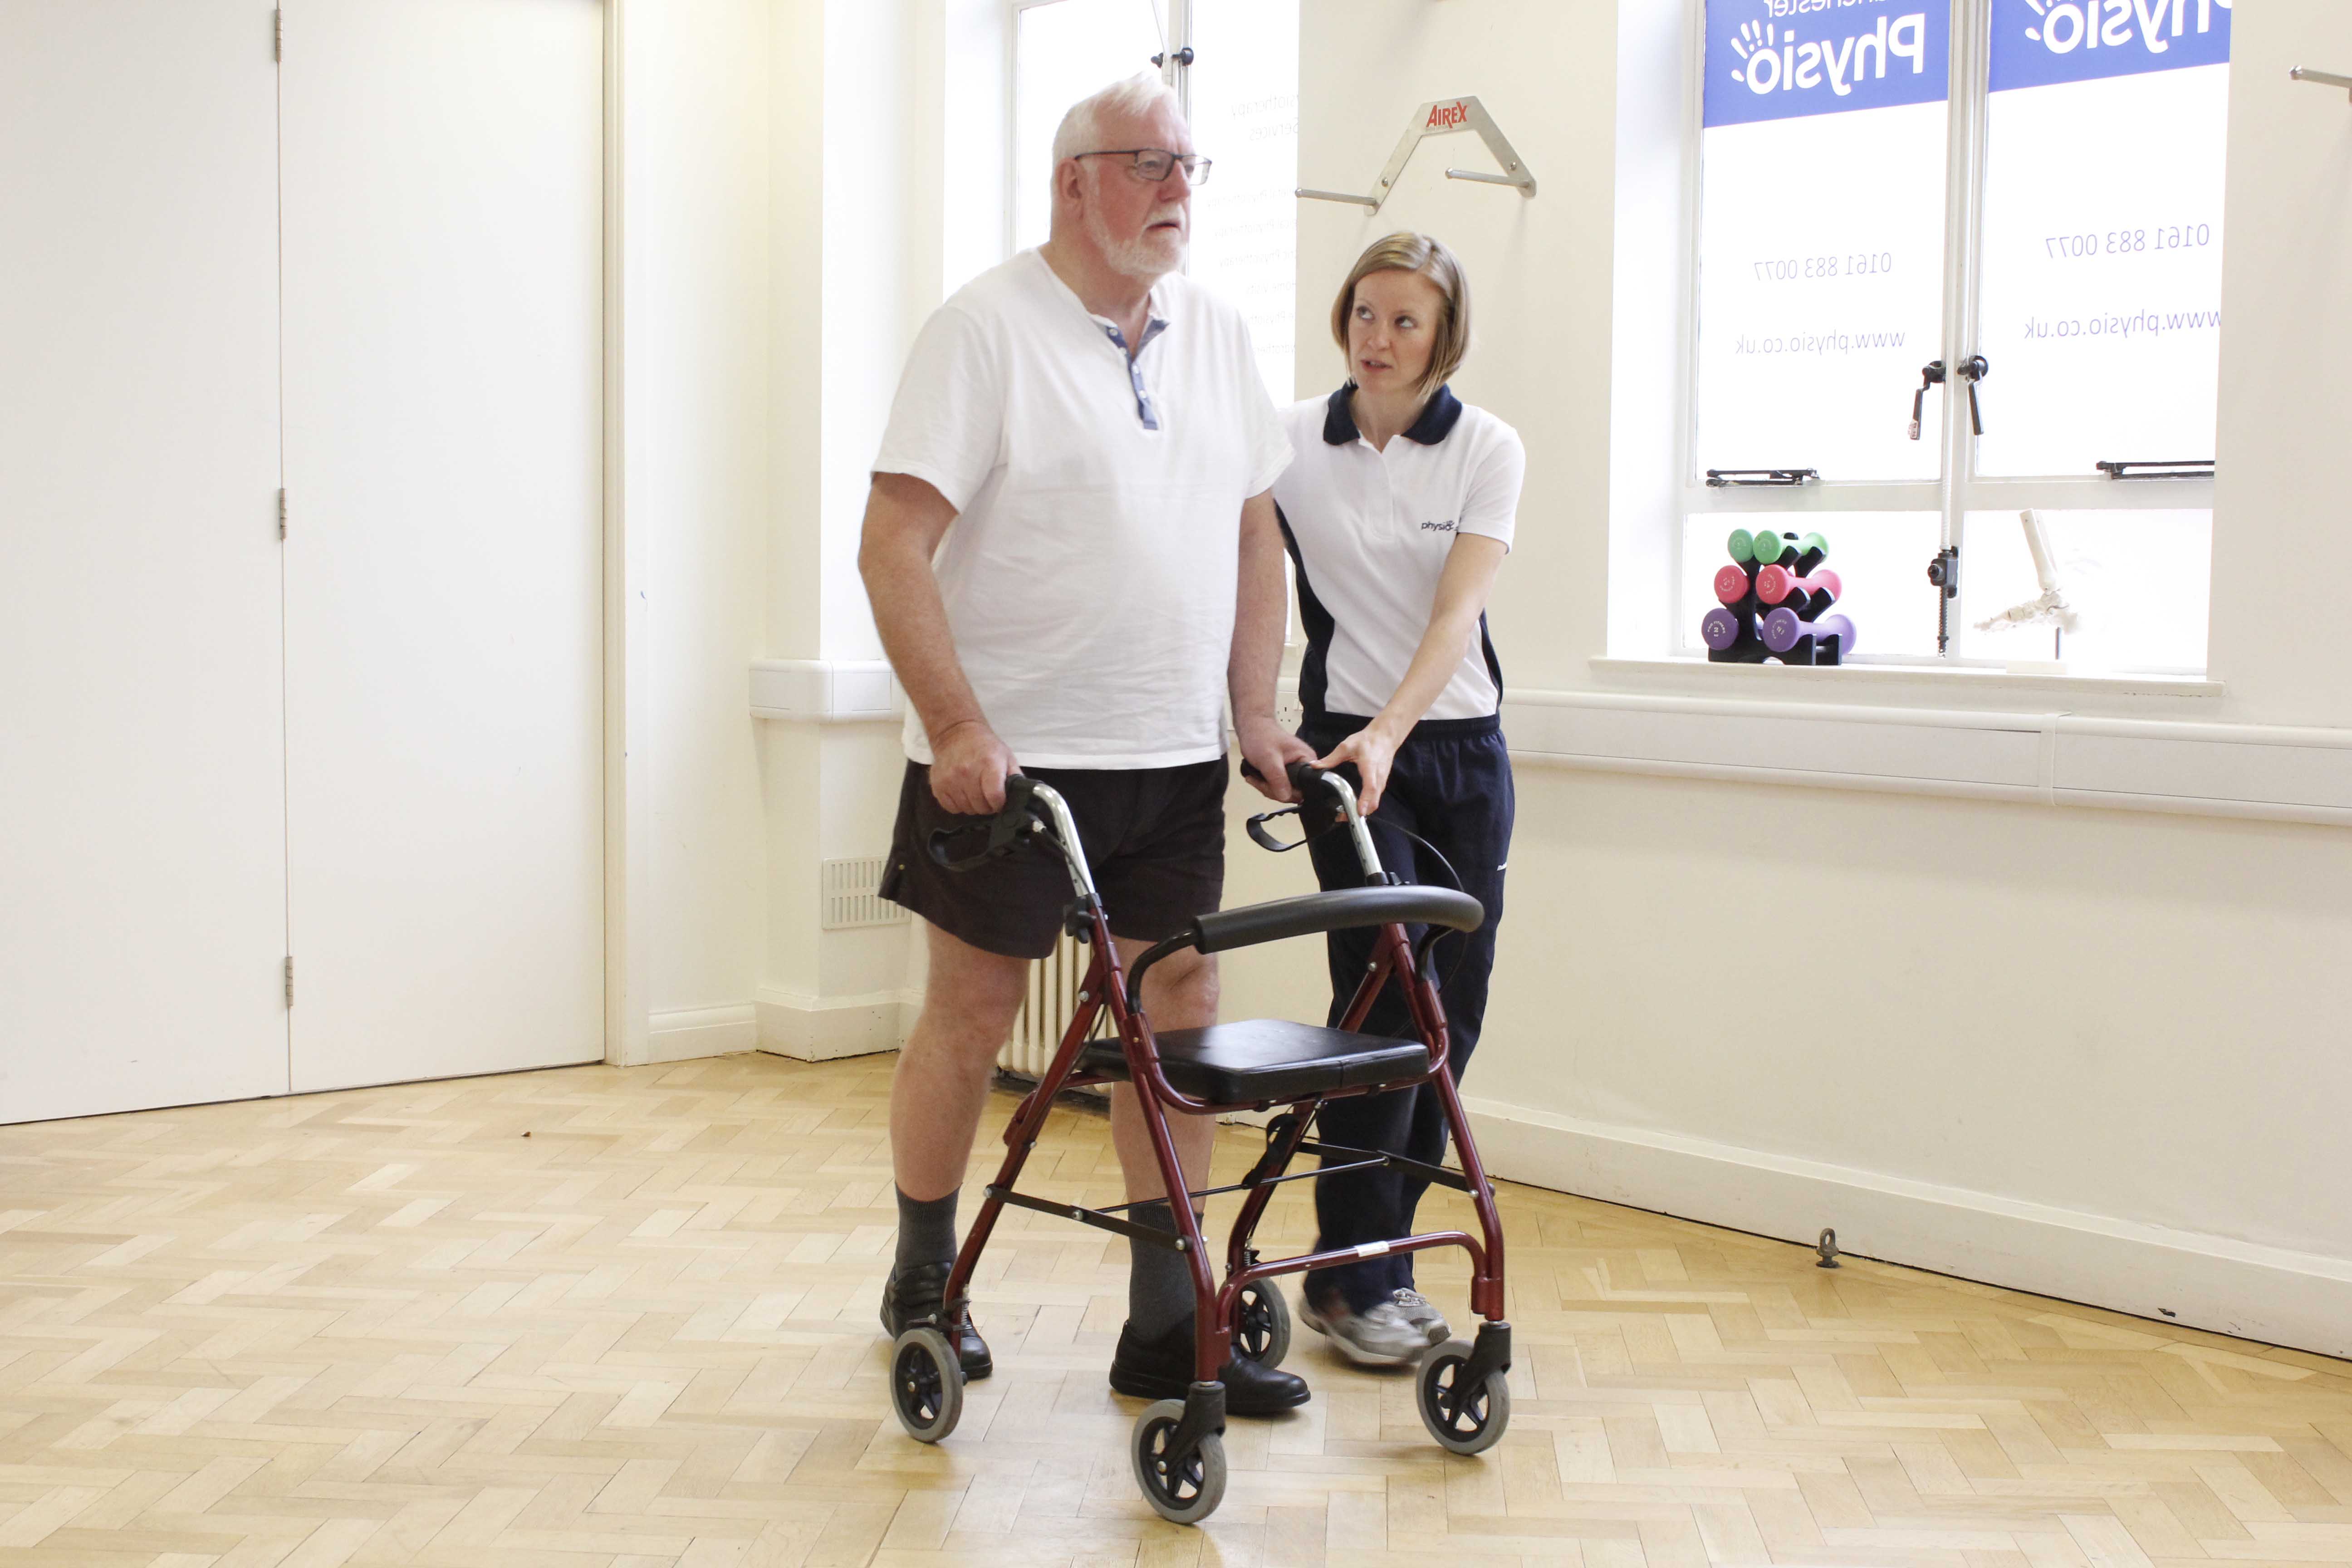 Gait re-education exercises closely supervised by a specialist neurological physiotherapist